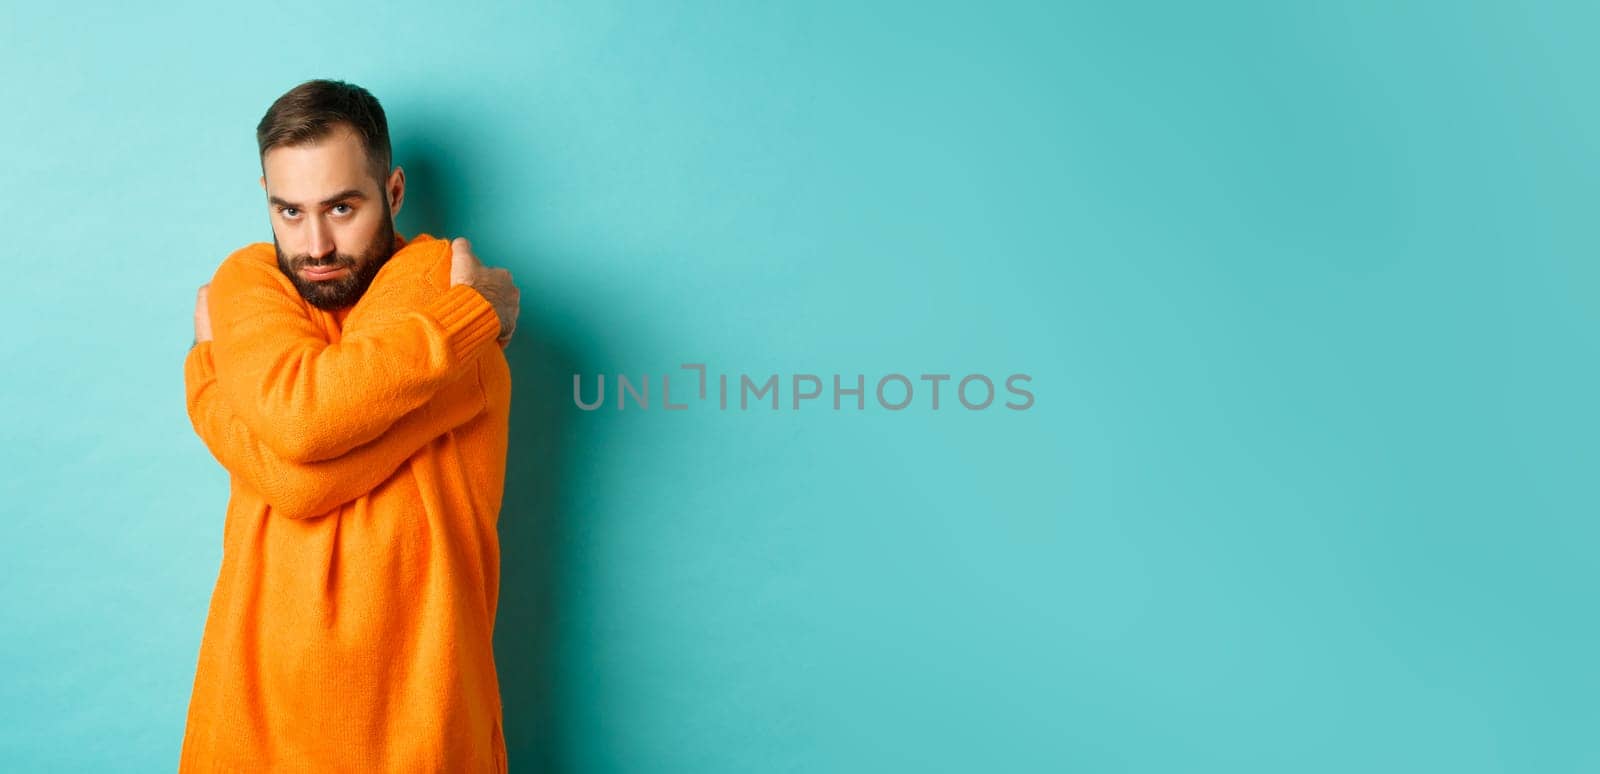 Timid man feeling offended and defensive, hugging himself and looking suspicious at camera, standing over light blue background.